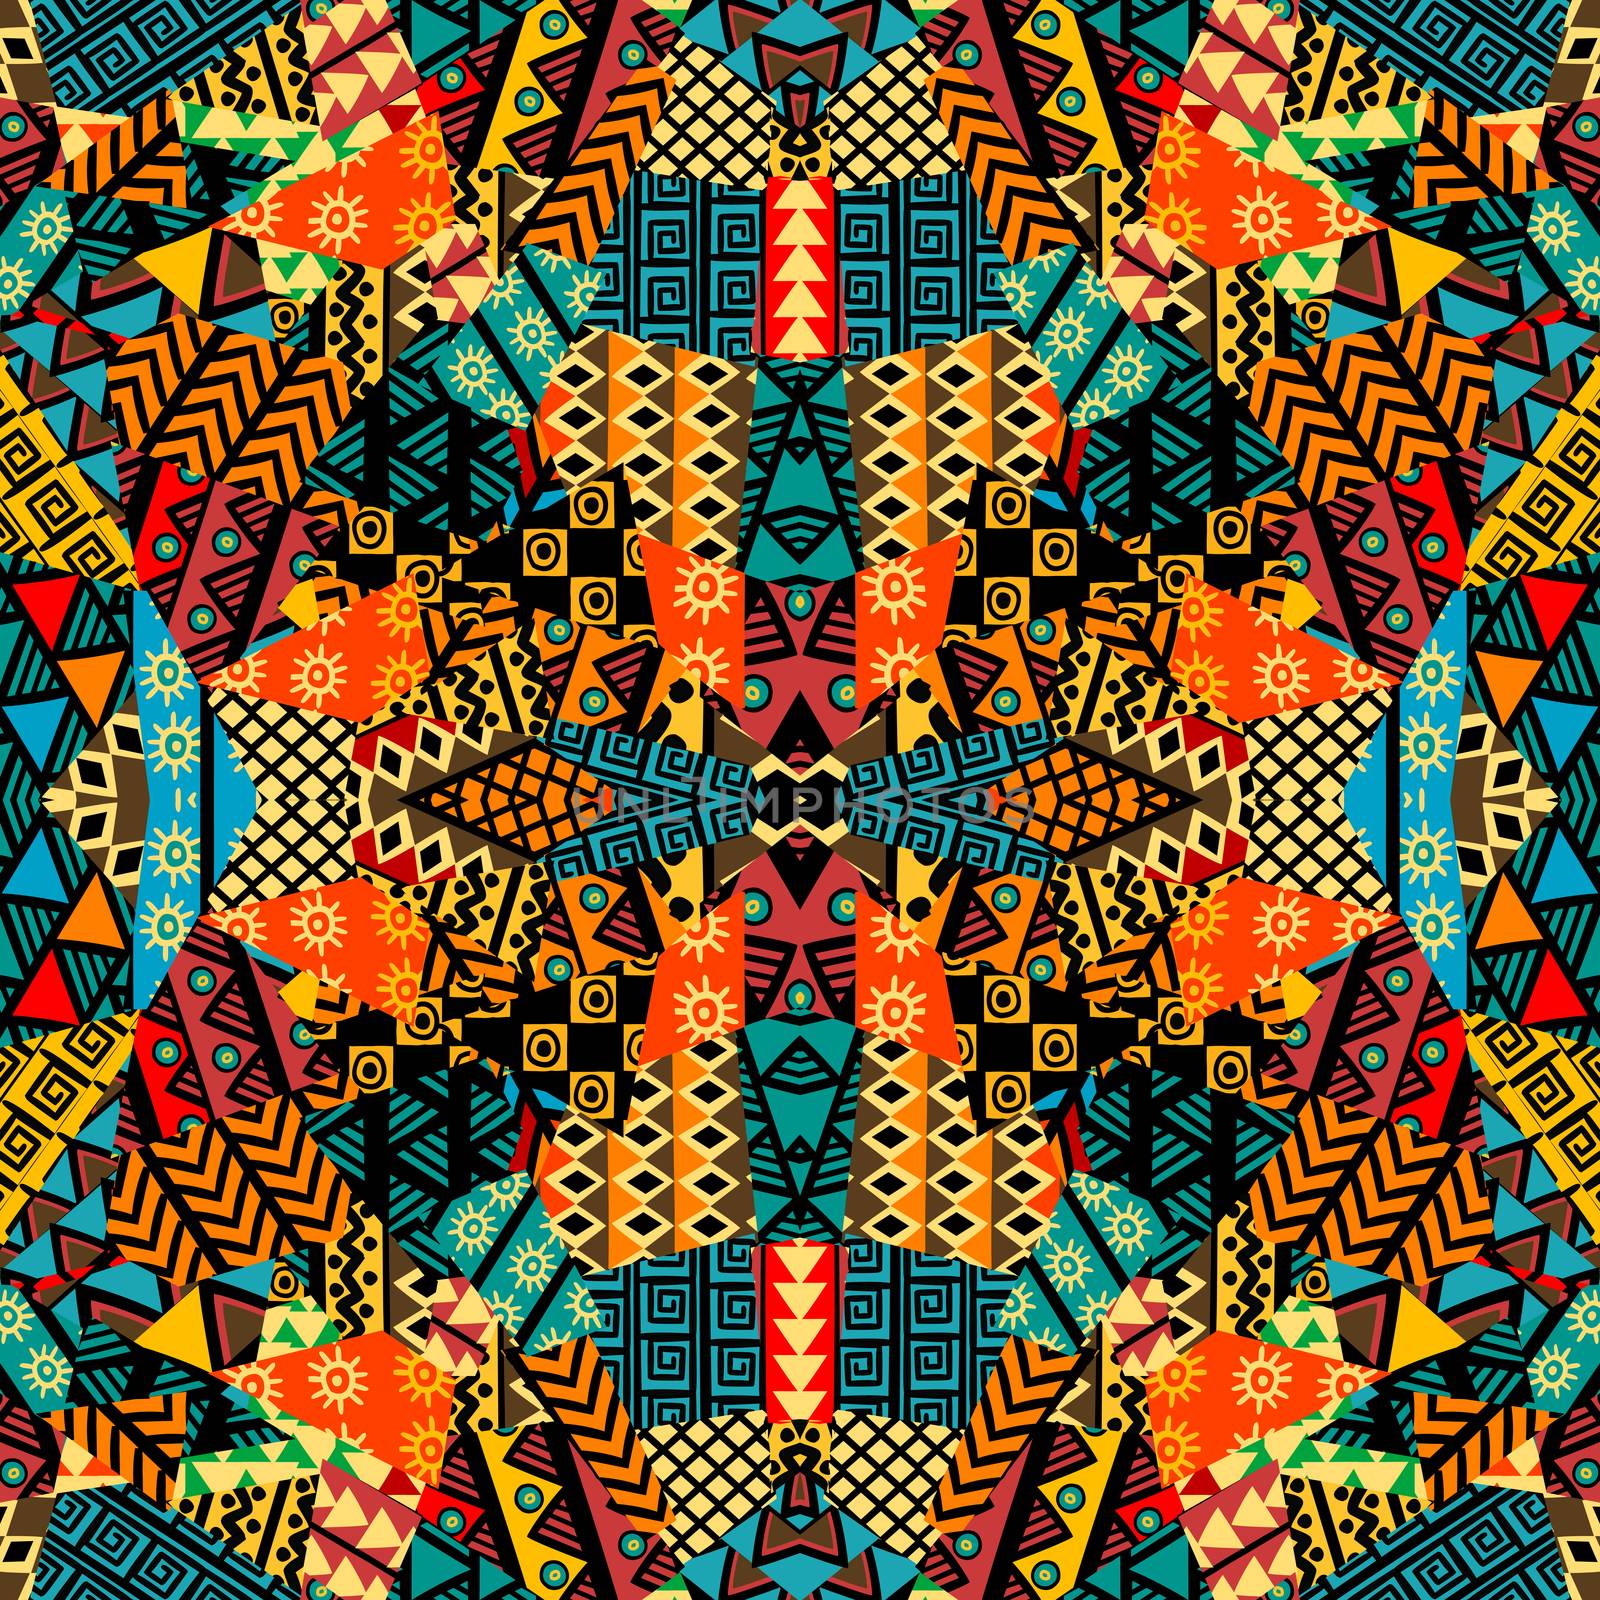 Colored ethnic patchwork mosaic with african motifs